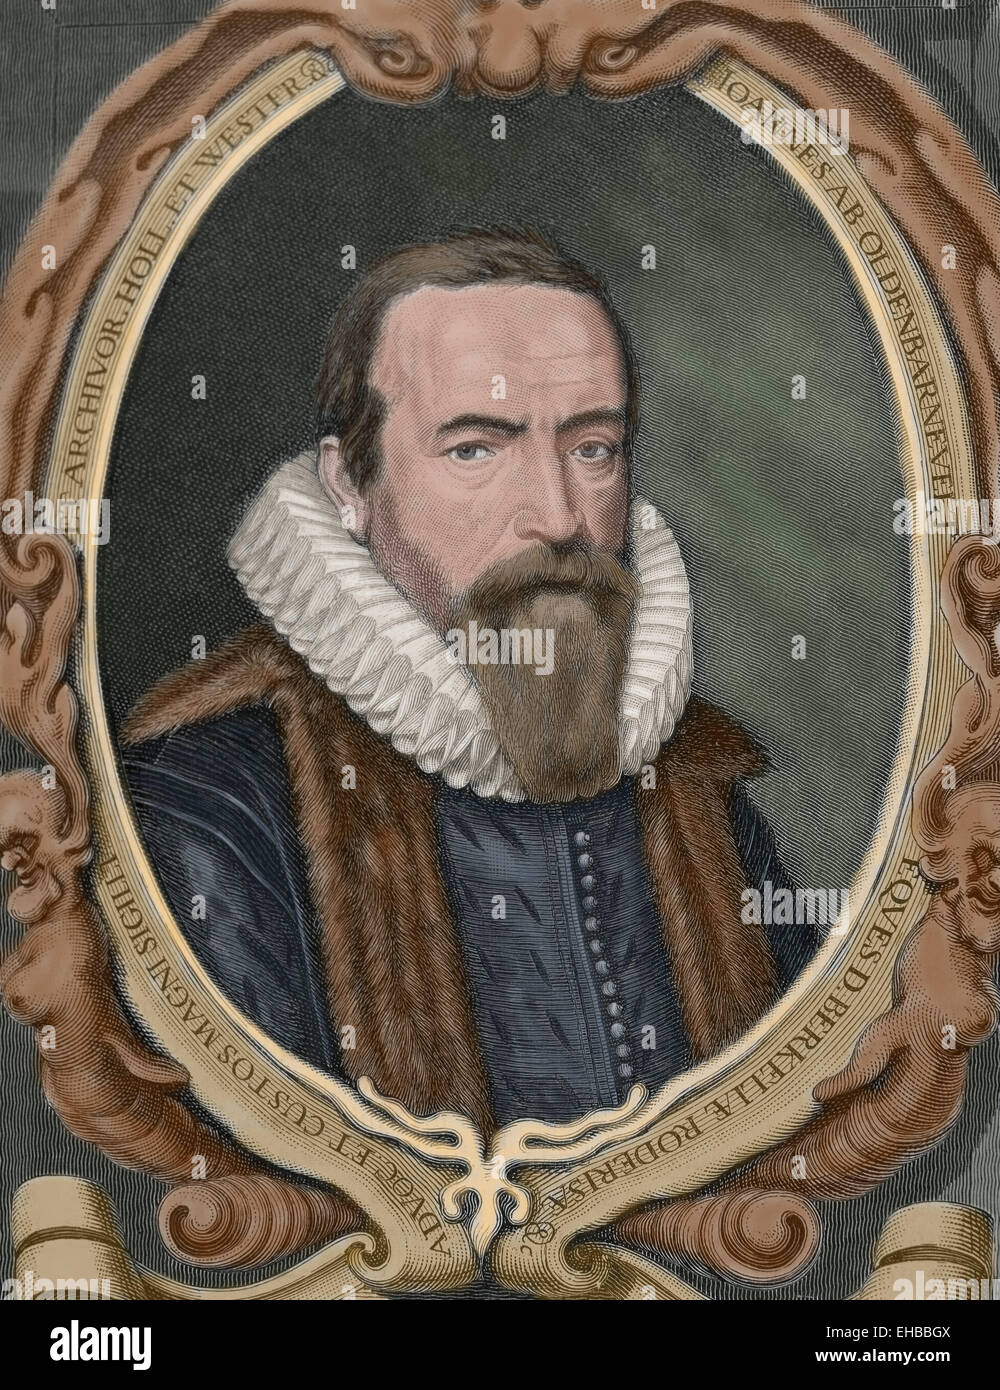 Johan van Oldenbarnevelt (1547–1619), Lord of Berkel en Rodenrijs (1600), Gunterstein (1611) and Bakkum (1613). Dutch statesman who played an important role in the Dutch struggle for independence from Spain. Portrait. Engraving. Colored. Stock Photo